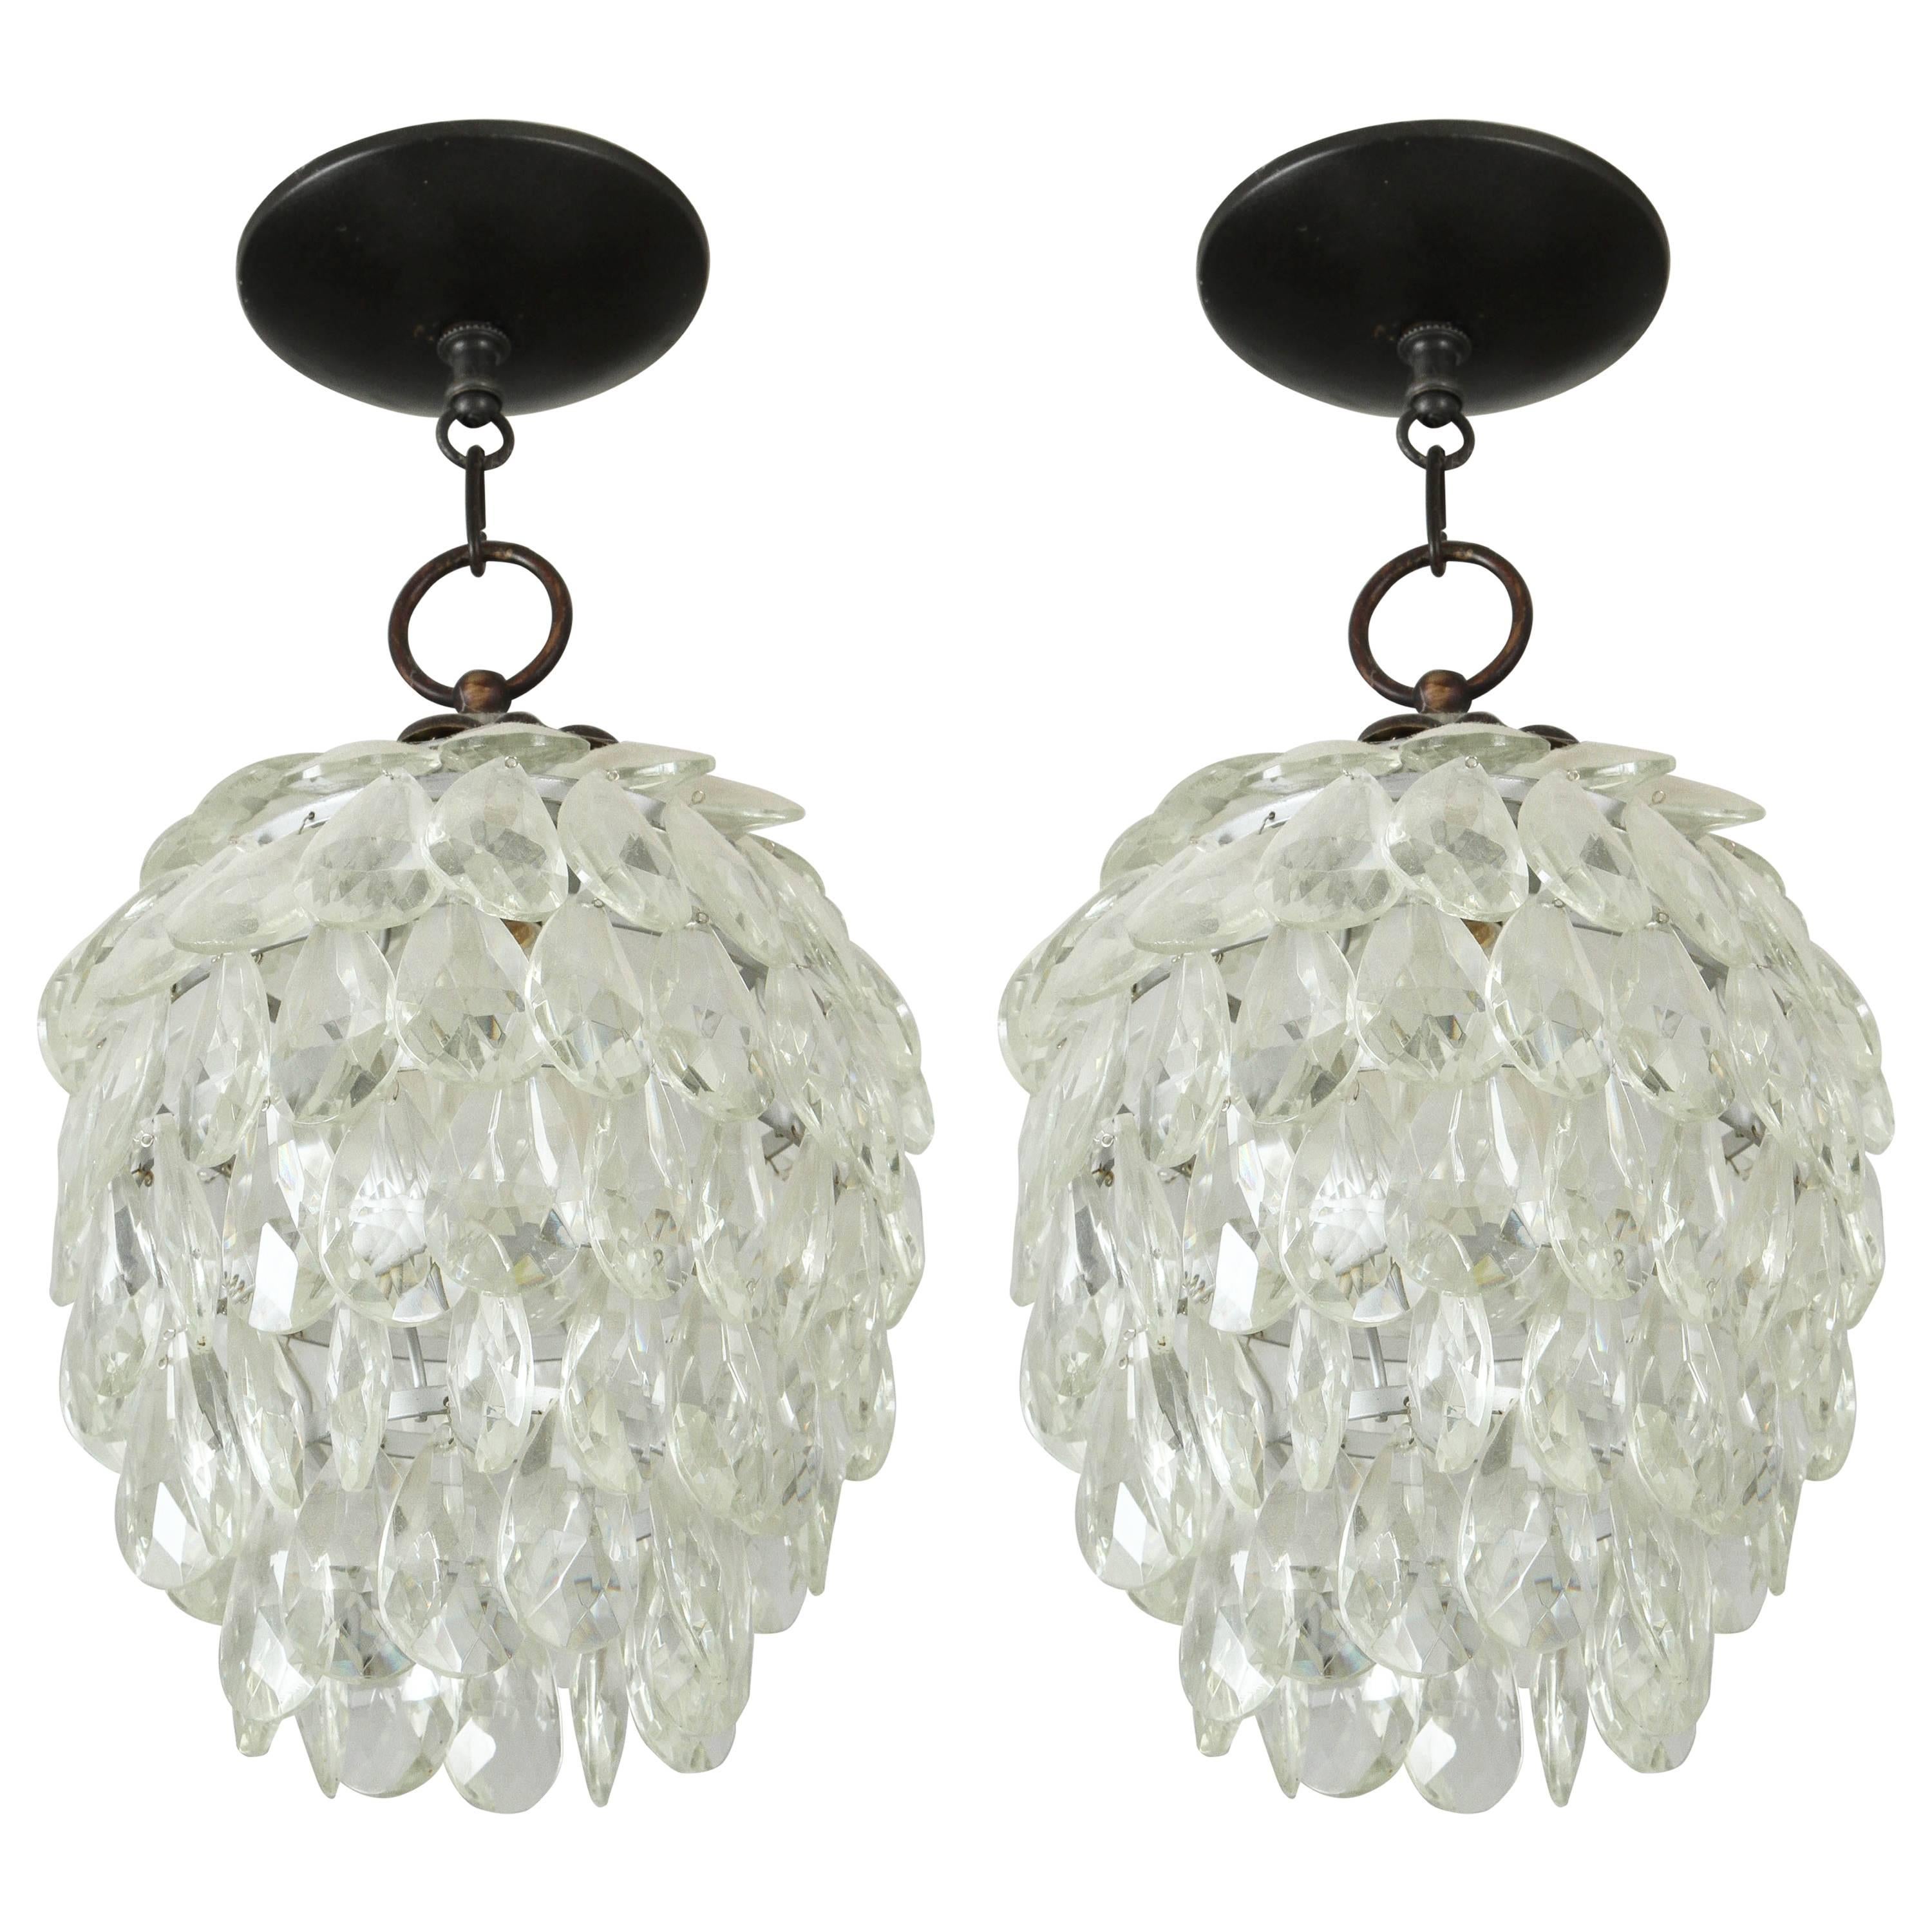 Pair of Charming Pendant Lights with Faceted Glass Teardrop Petals